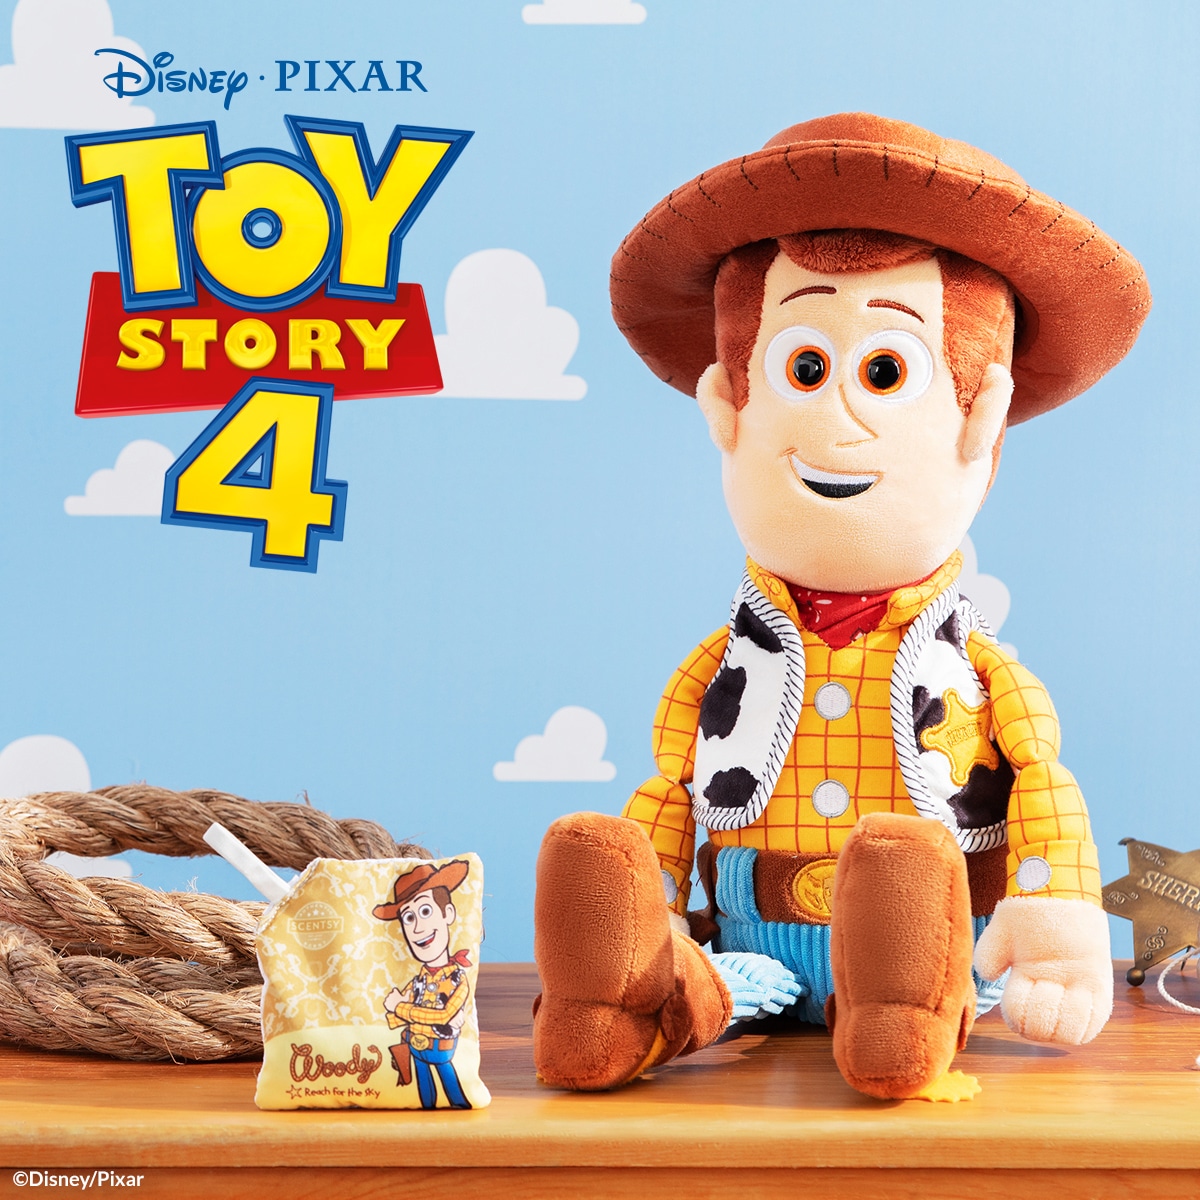 Toy Story 4 - Scentsy Buddies, Buzz Lightyear & Woody - The Candle